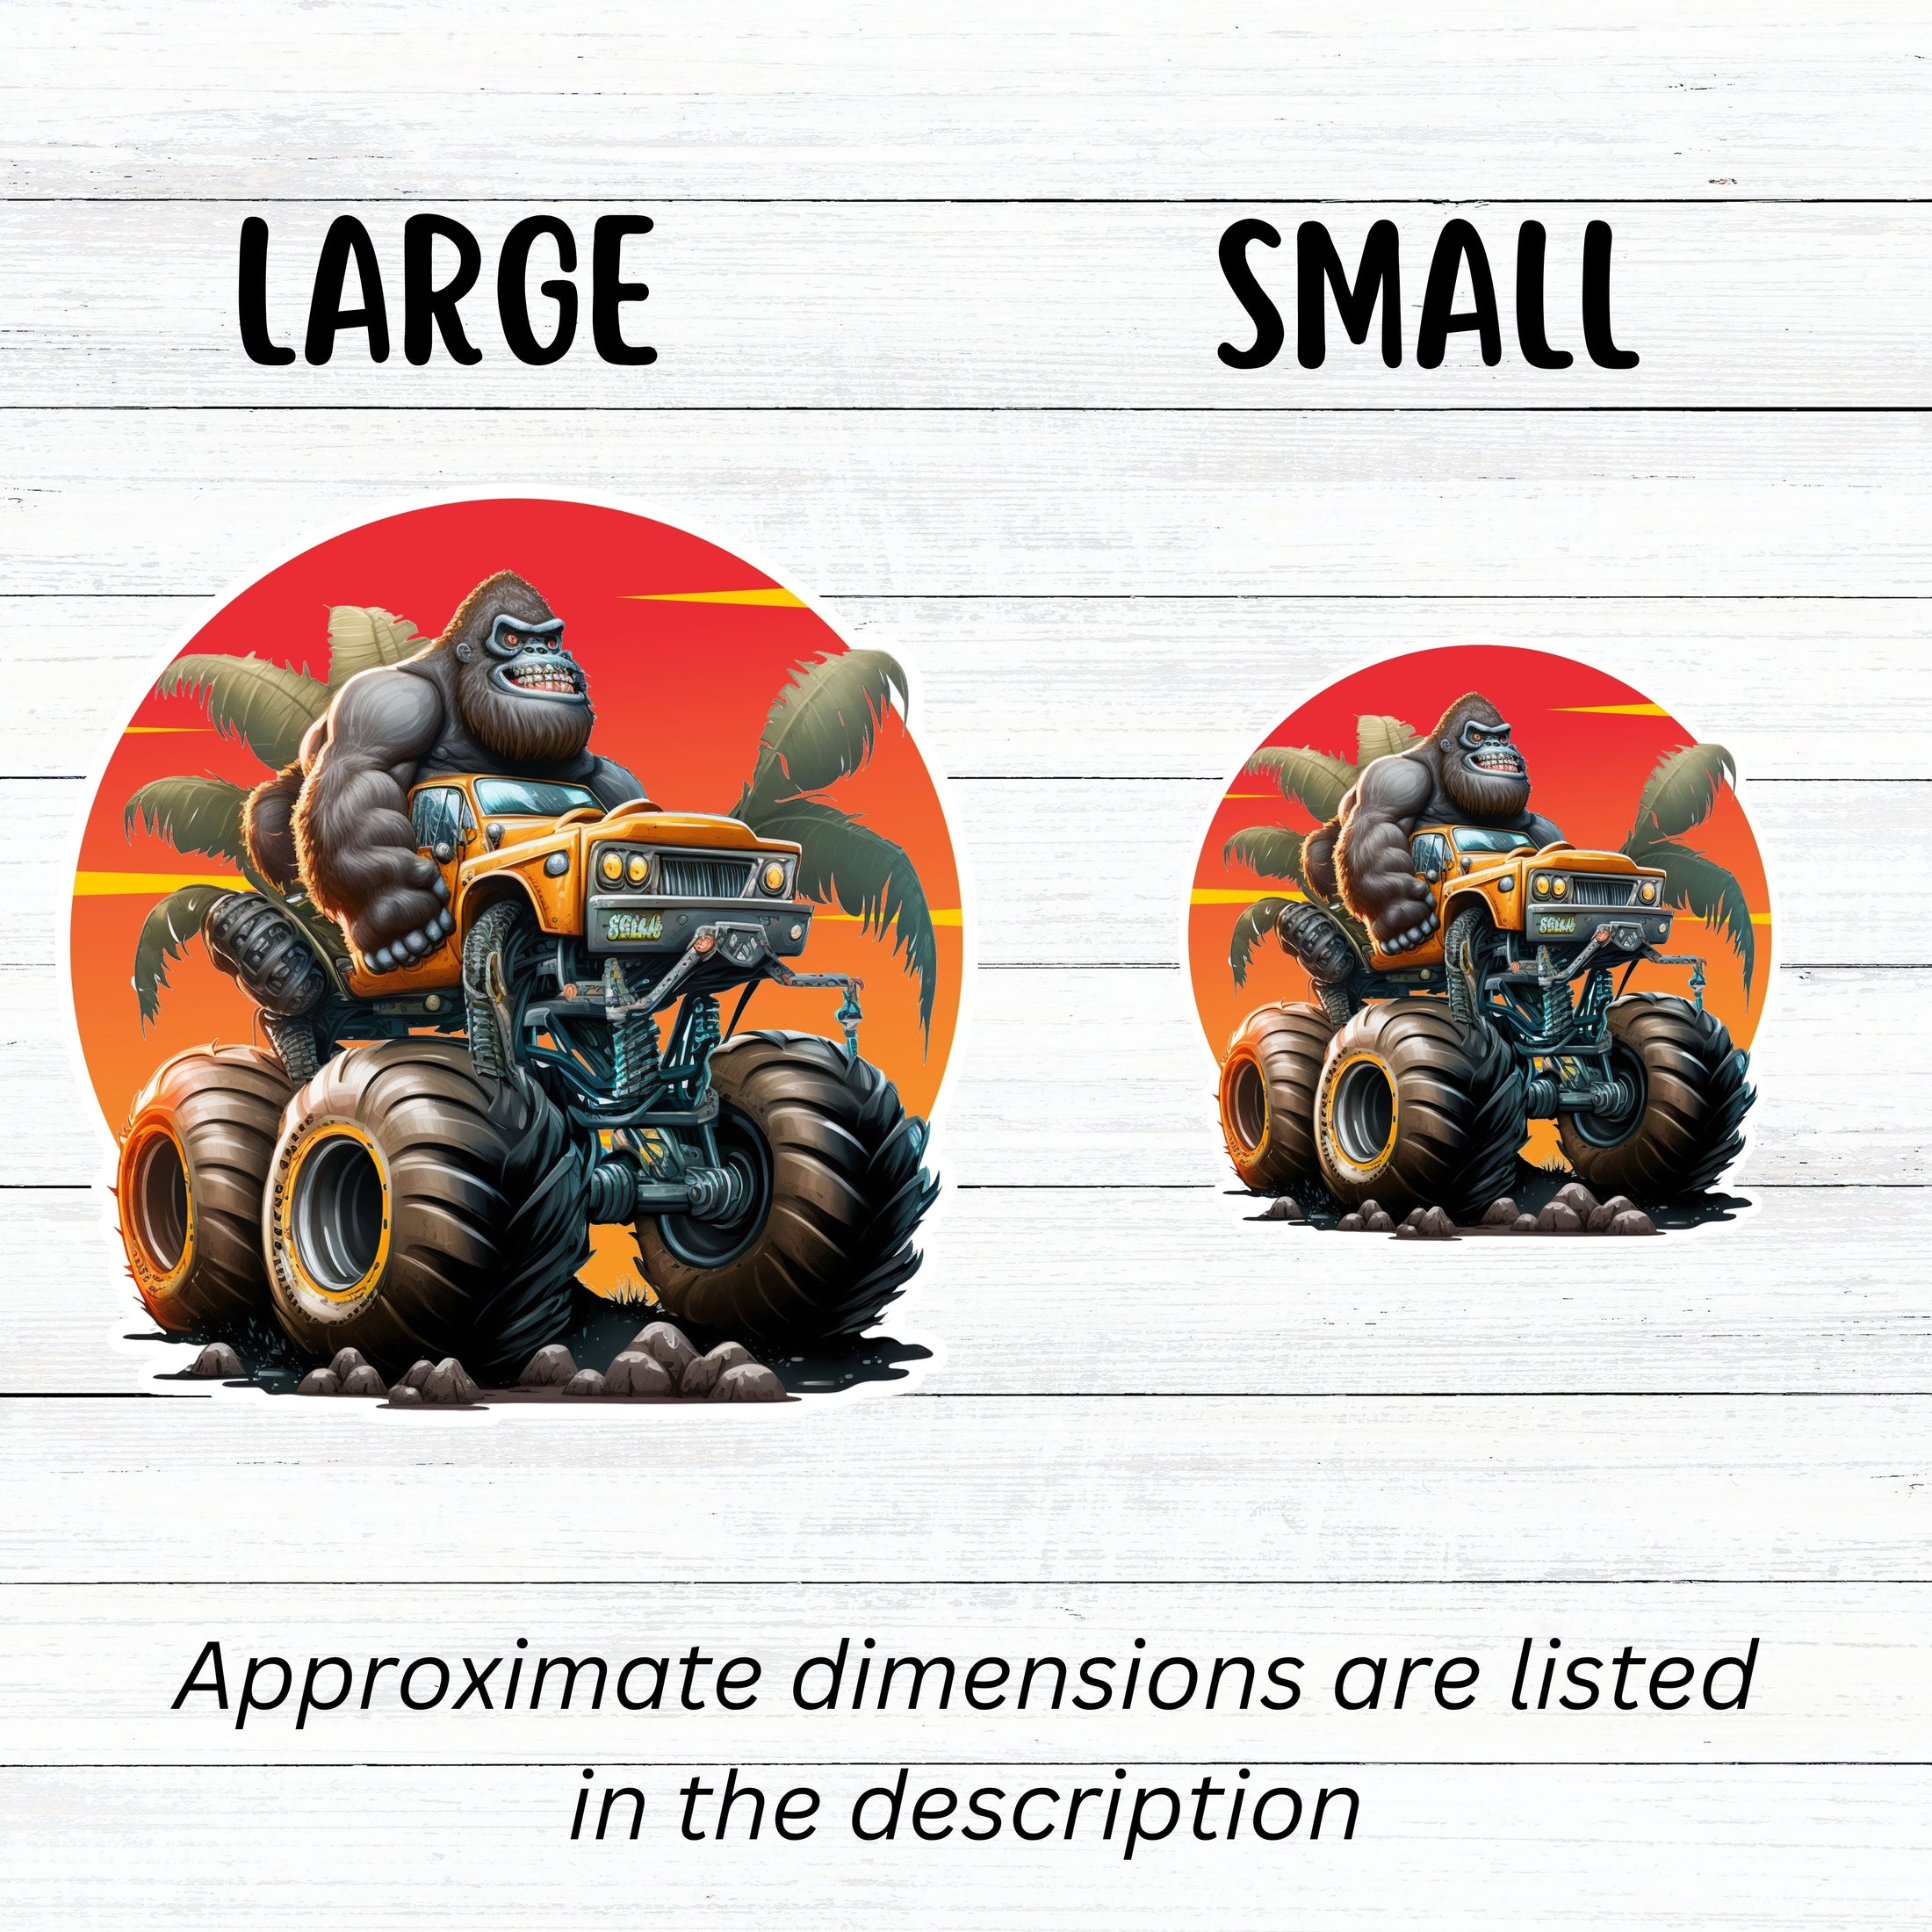 This image shows large and small gorilla monster truck stickers next to each other.